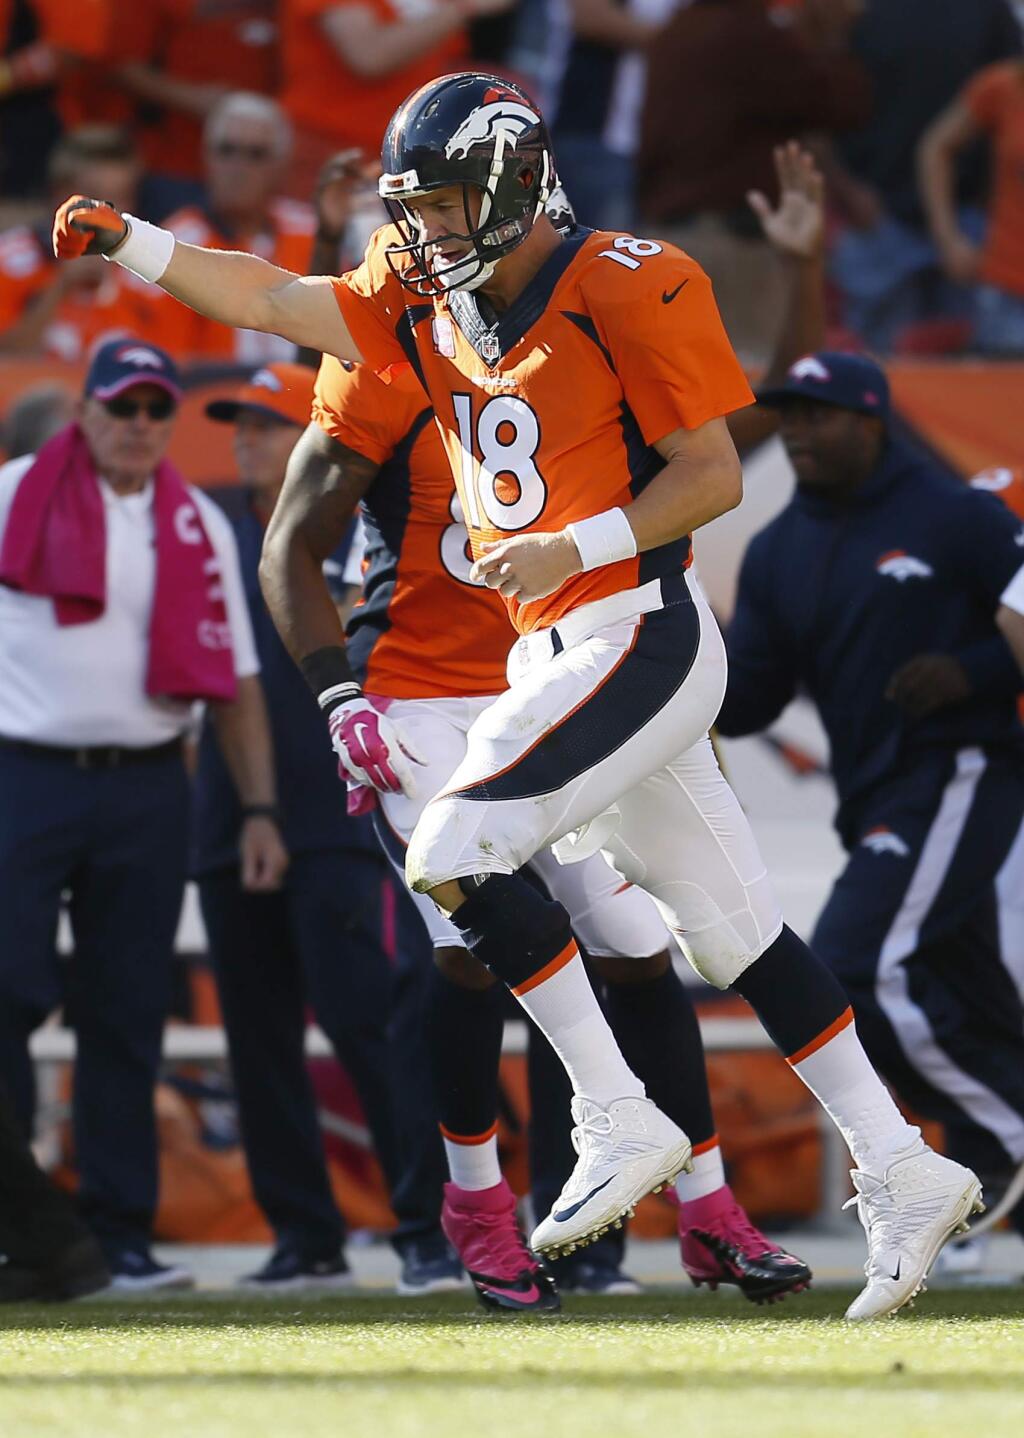 FILE - In this Oct. 5, 2014, file photo, Denver Broncos quarterback Peyton Manning (18) runs upfield after a touchdown pass against the Arizona Cardinals during the second half of an NFL football game in Denver. Next Sunday, Oct. 19, 2014, against San Francisco, or perhaps the following Thursday against San Diego, Manning will surpass Brett Favre's NFL record 508 touchdown passes. Manning is two shy after throwing for three scores in a 31-17 victory over the New York Jets on Sunday. (AP Photo/Joe Mahoney, File)